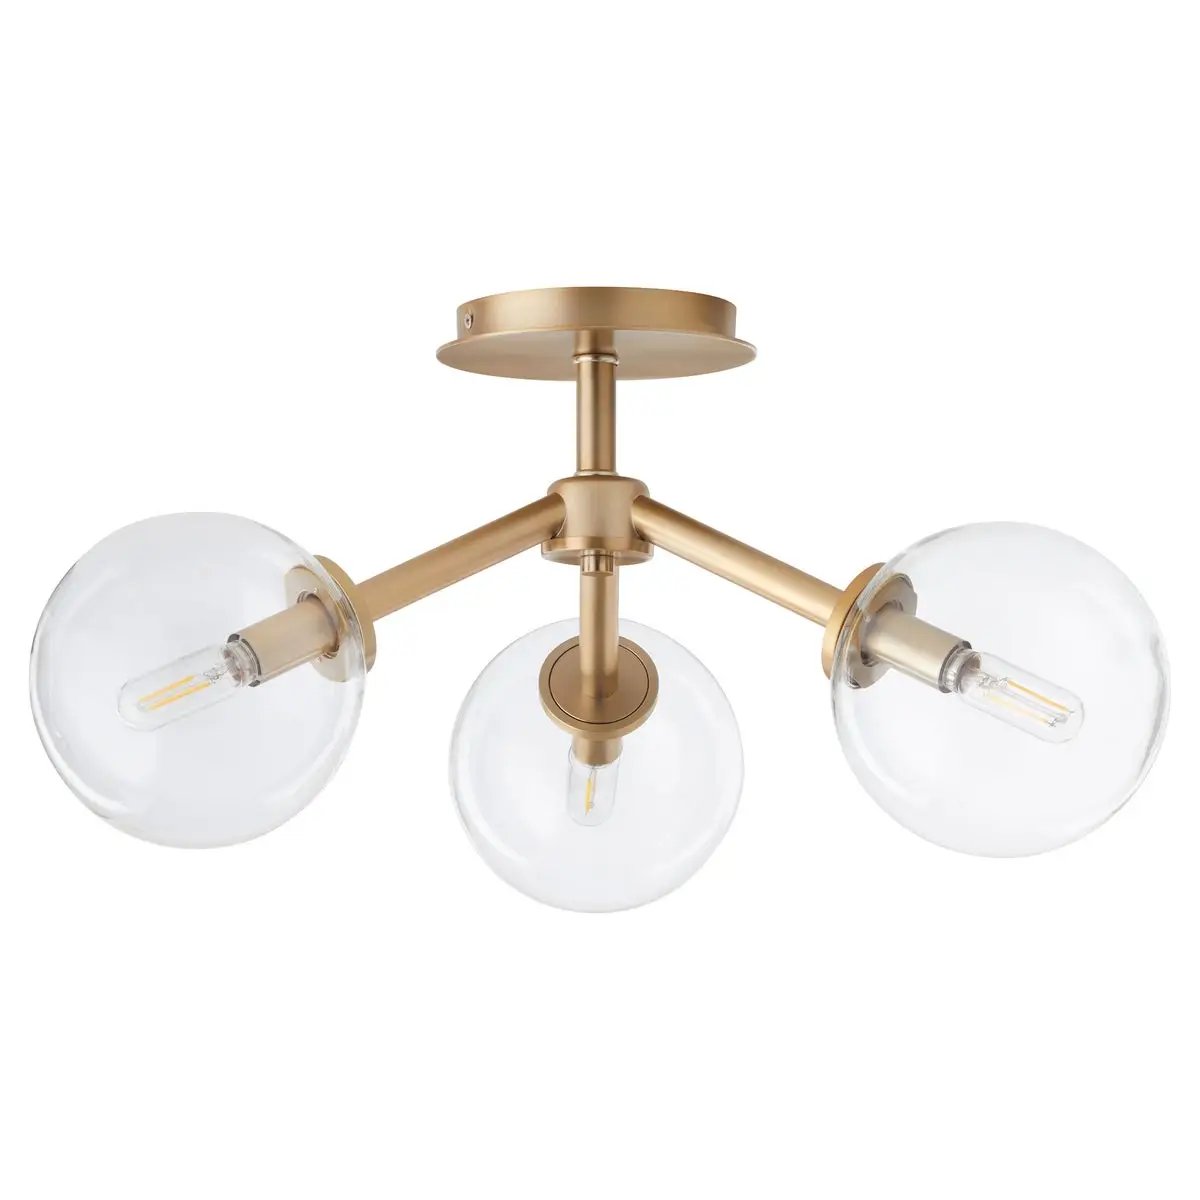 Sputnik Flush Mount Ceiling Light with clear glass globes and aged brass frames. Mid-century modern appeal. 3 bulbs, 60W, dimmable. UL Listed. 21&quot;W x 10.5&quot;H.